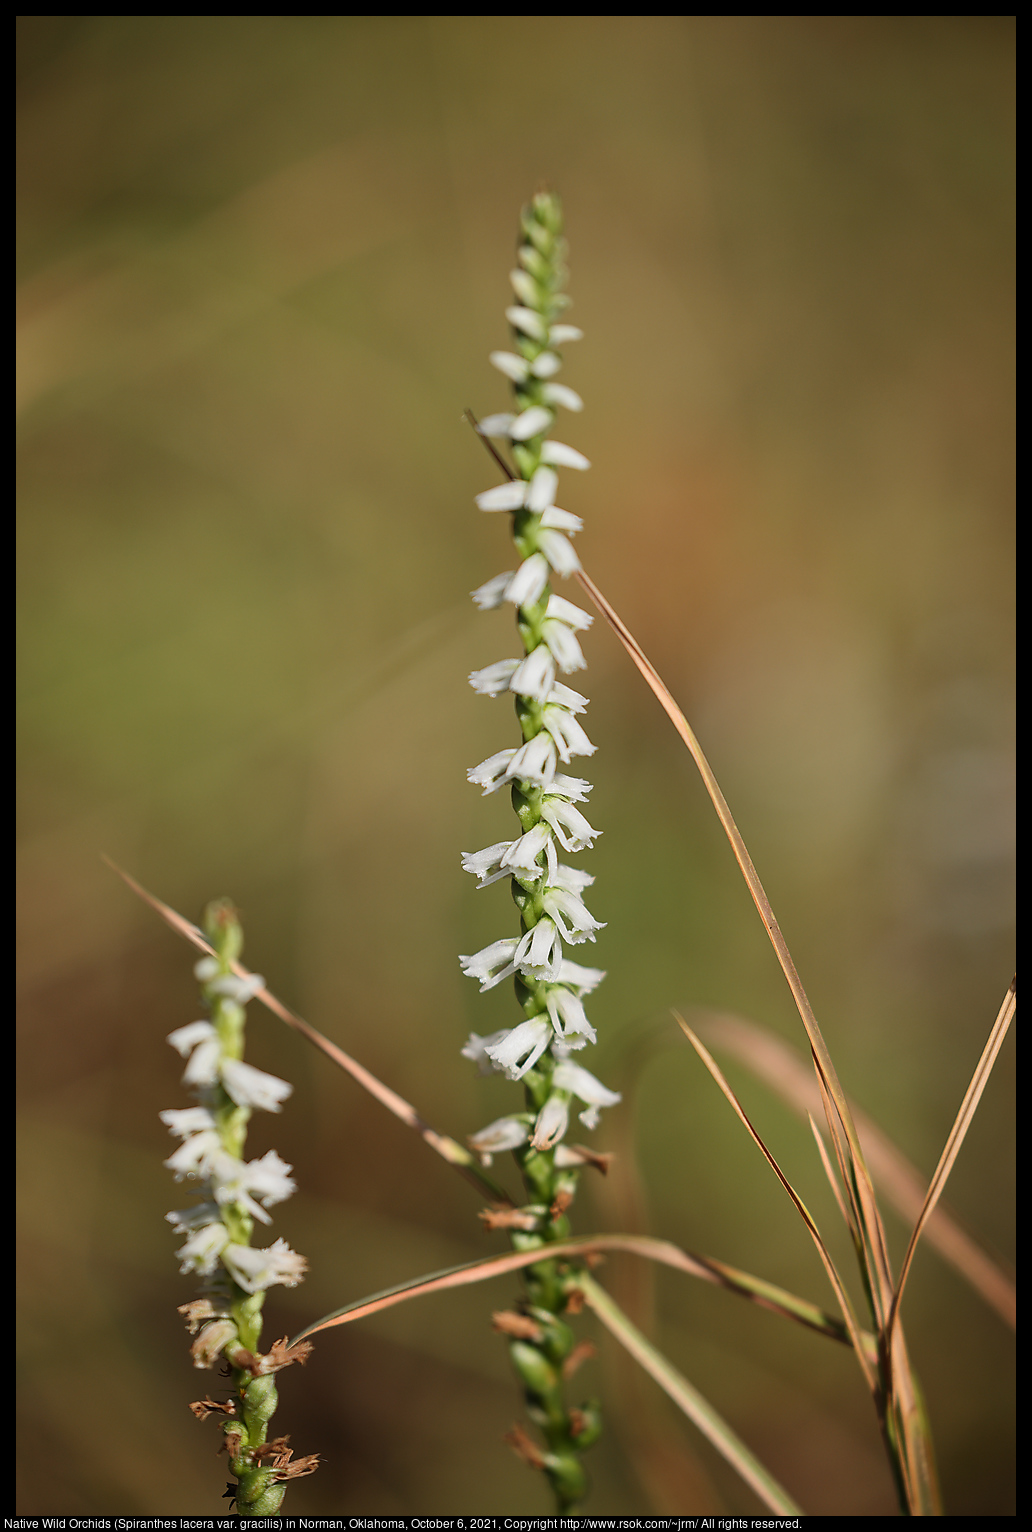 Native Wild Orchids (Spiranthes lacera var. gracilis) in Norman, Oklahoma, October 6, 2021